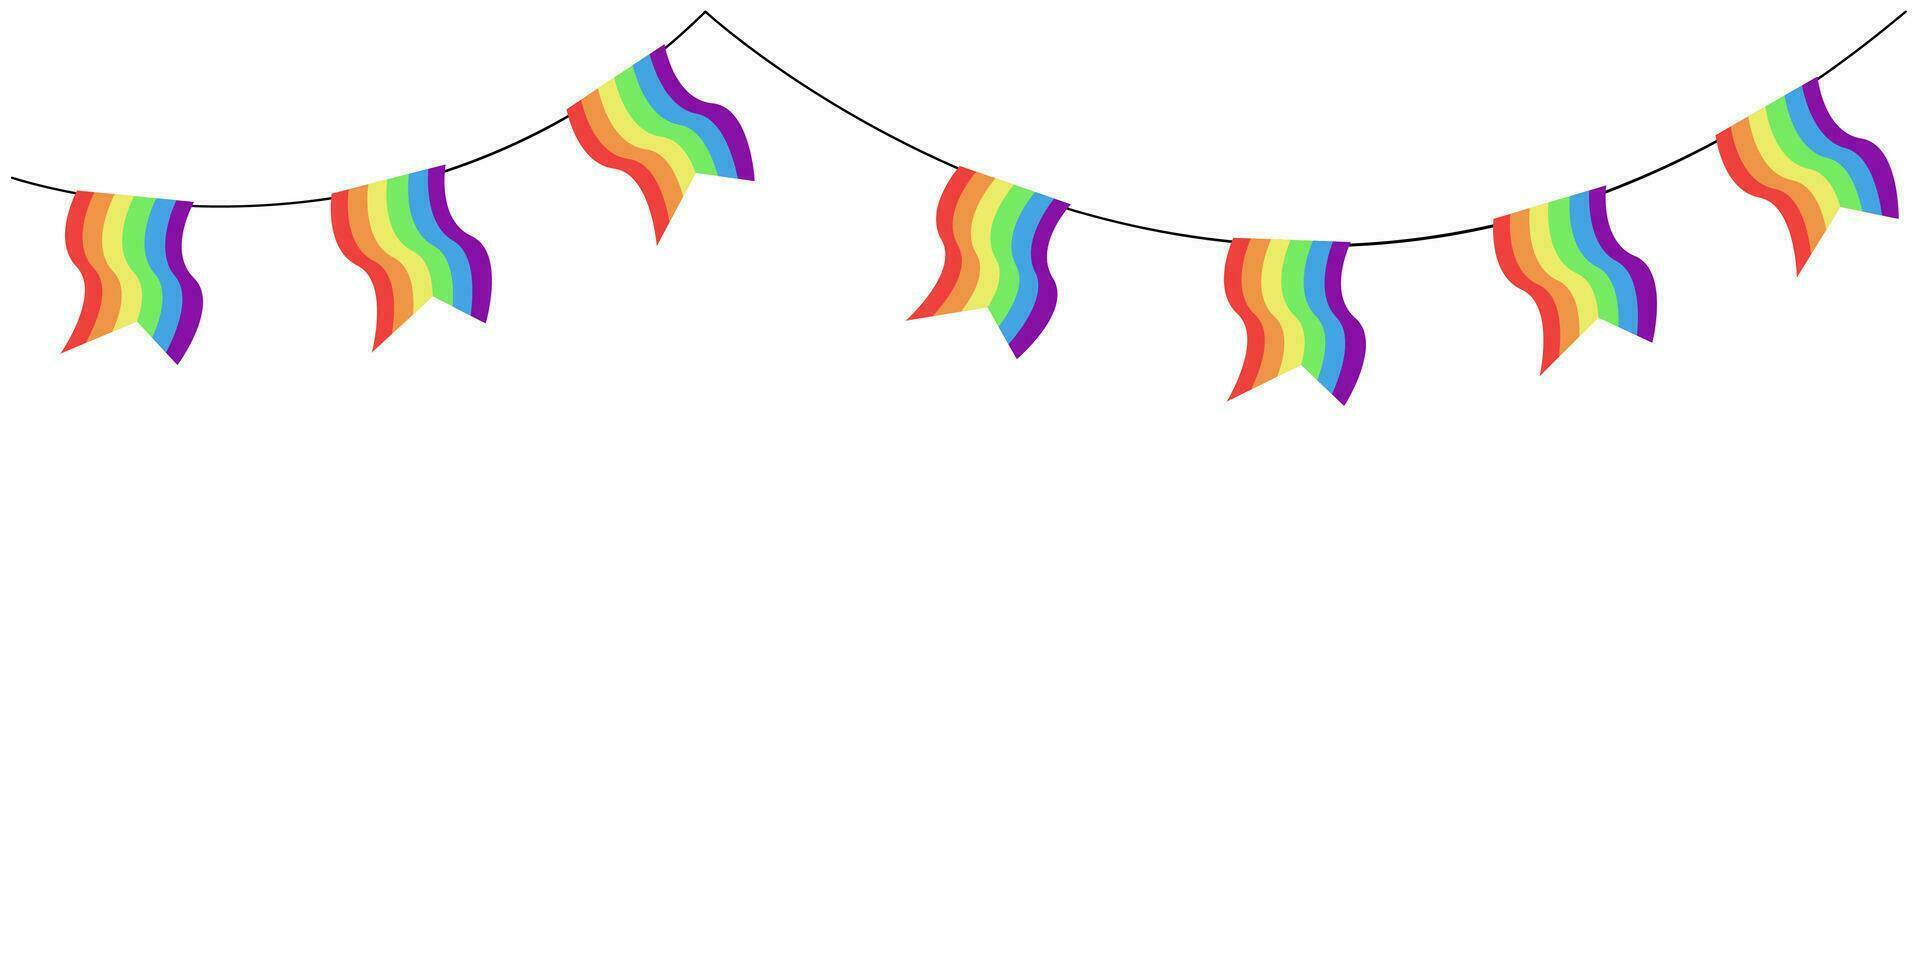 LGBT garland. Rainbow color pennants chain. LGBTQ bunting decoration. Celebration waving flags for pride decoration. Rainbowbunting garland Vector illustration. banner background copy space.